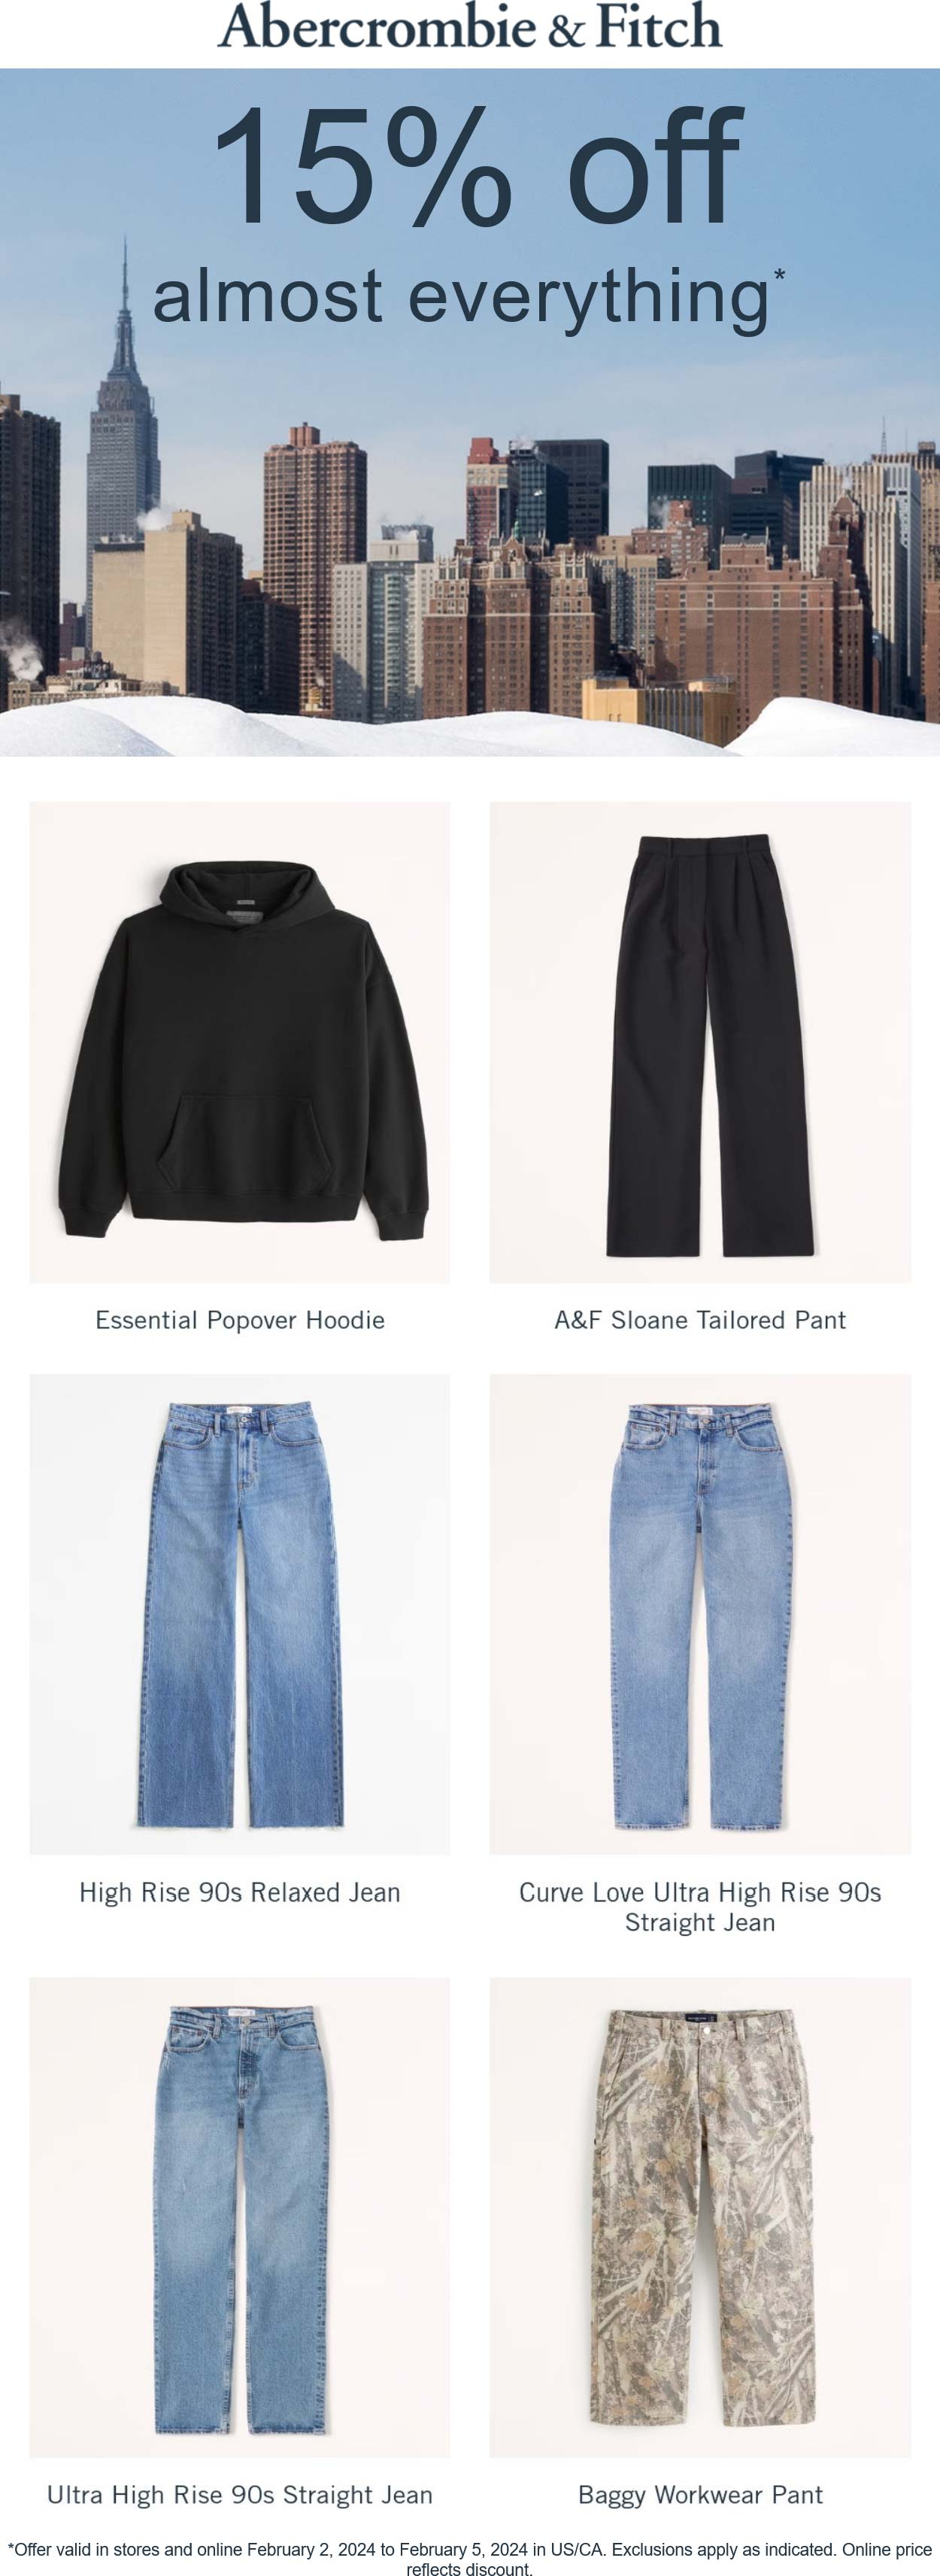 15% off everything at Abercrombie & Fitch, ditto online #abercrombiefitch